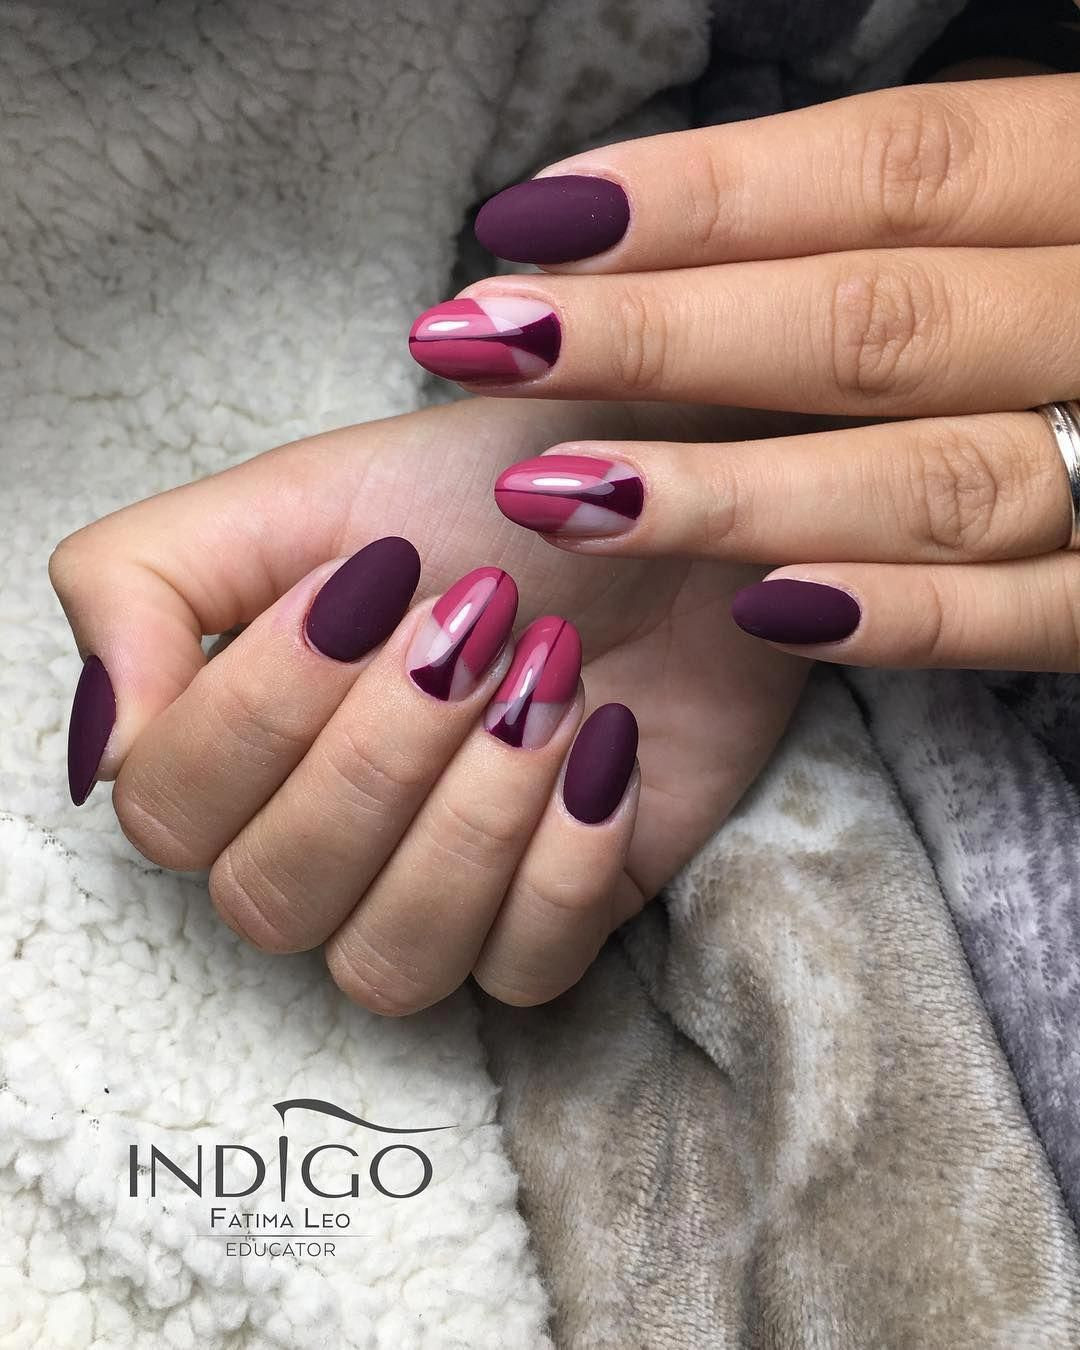 Trends Nageldesign 2019
 47 trends for decorated nails 2019 nails nailart